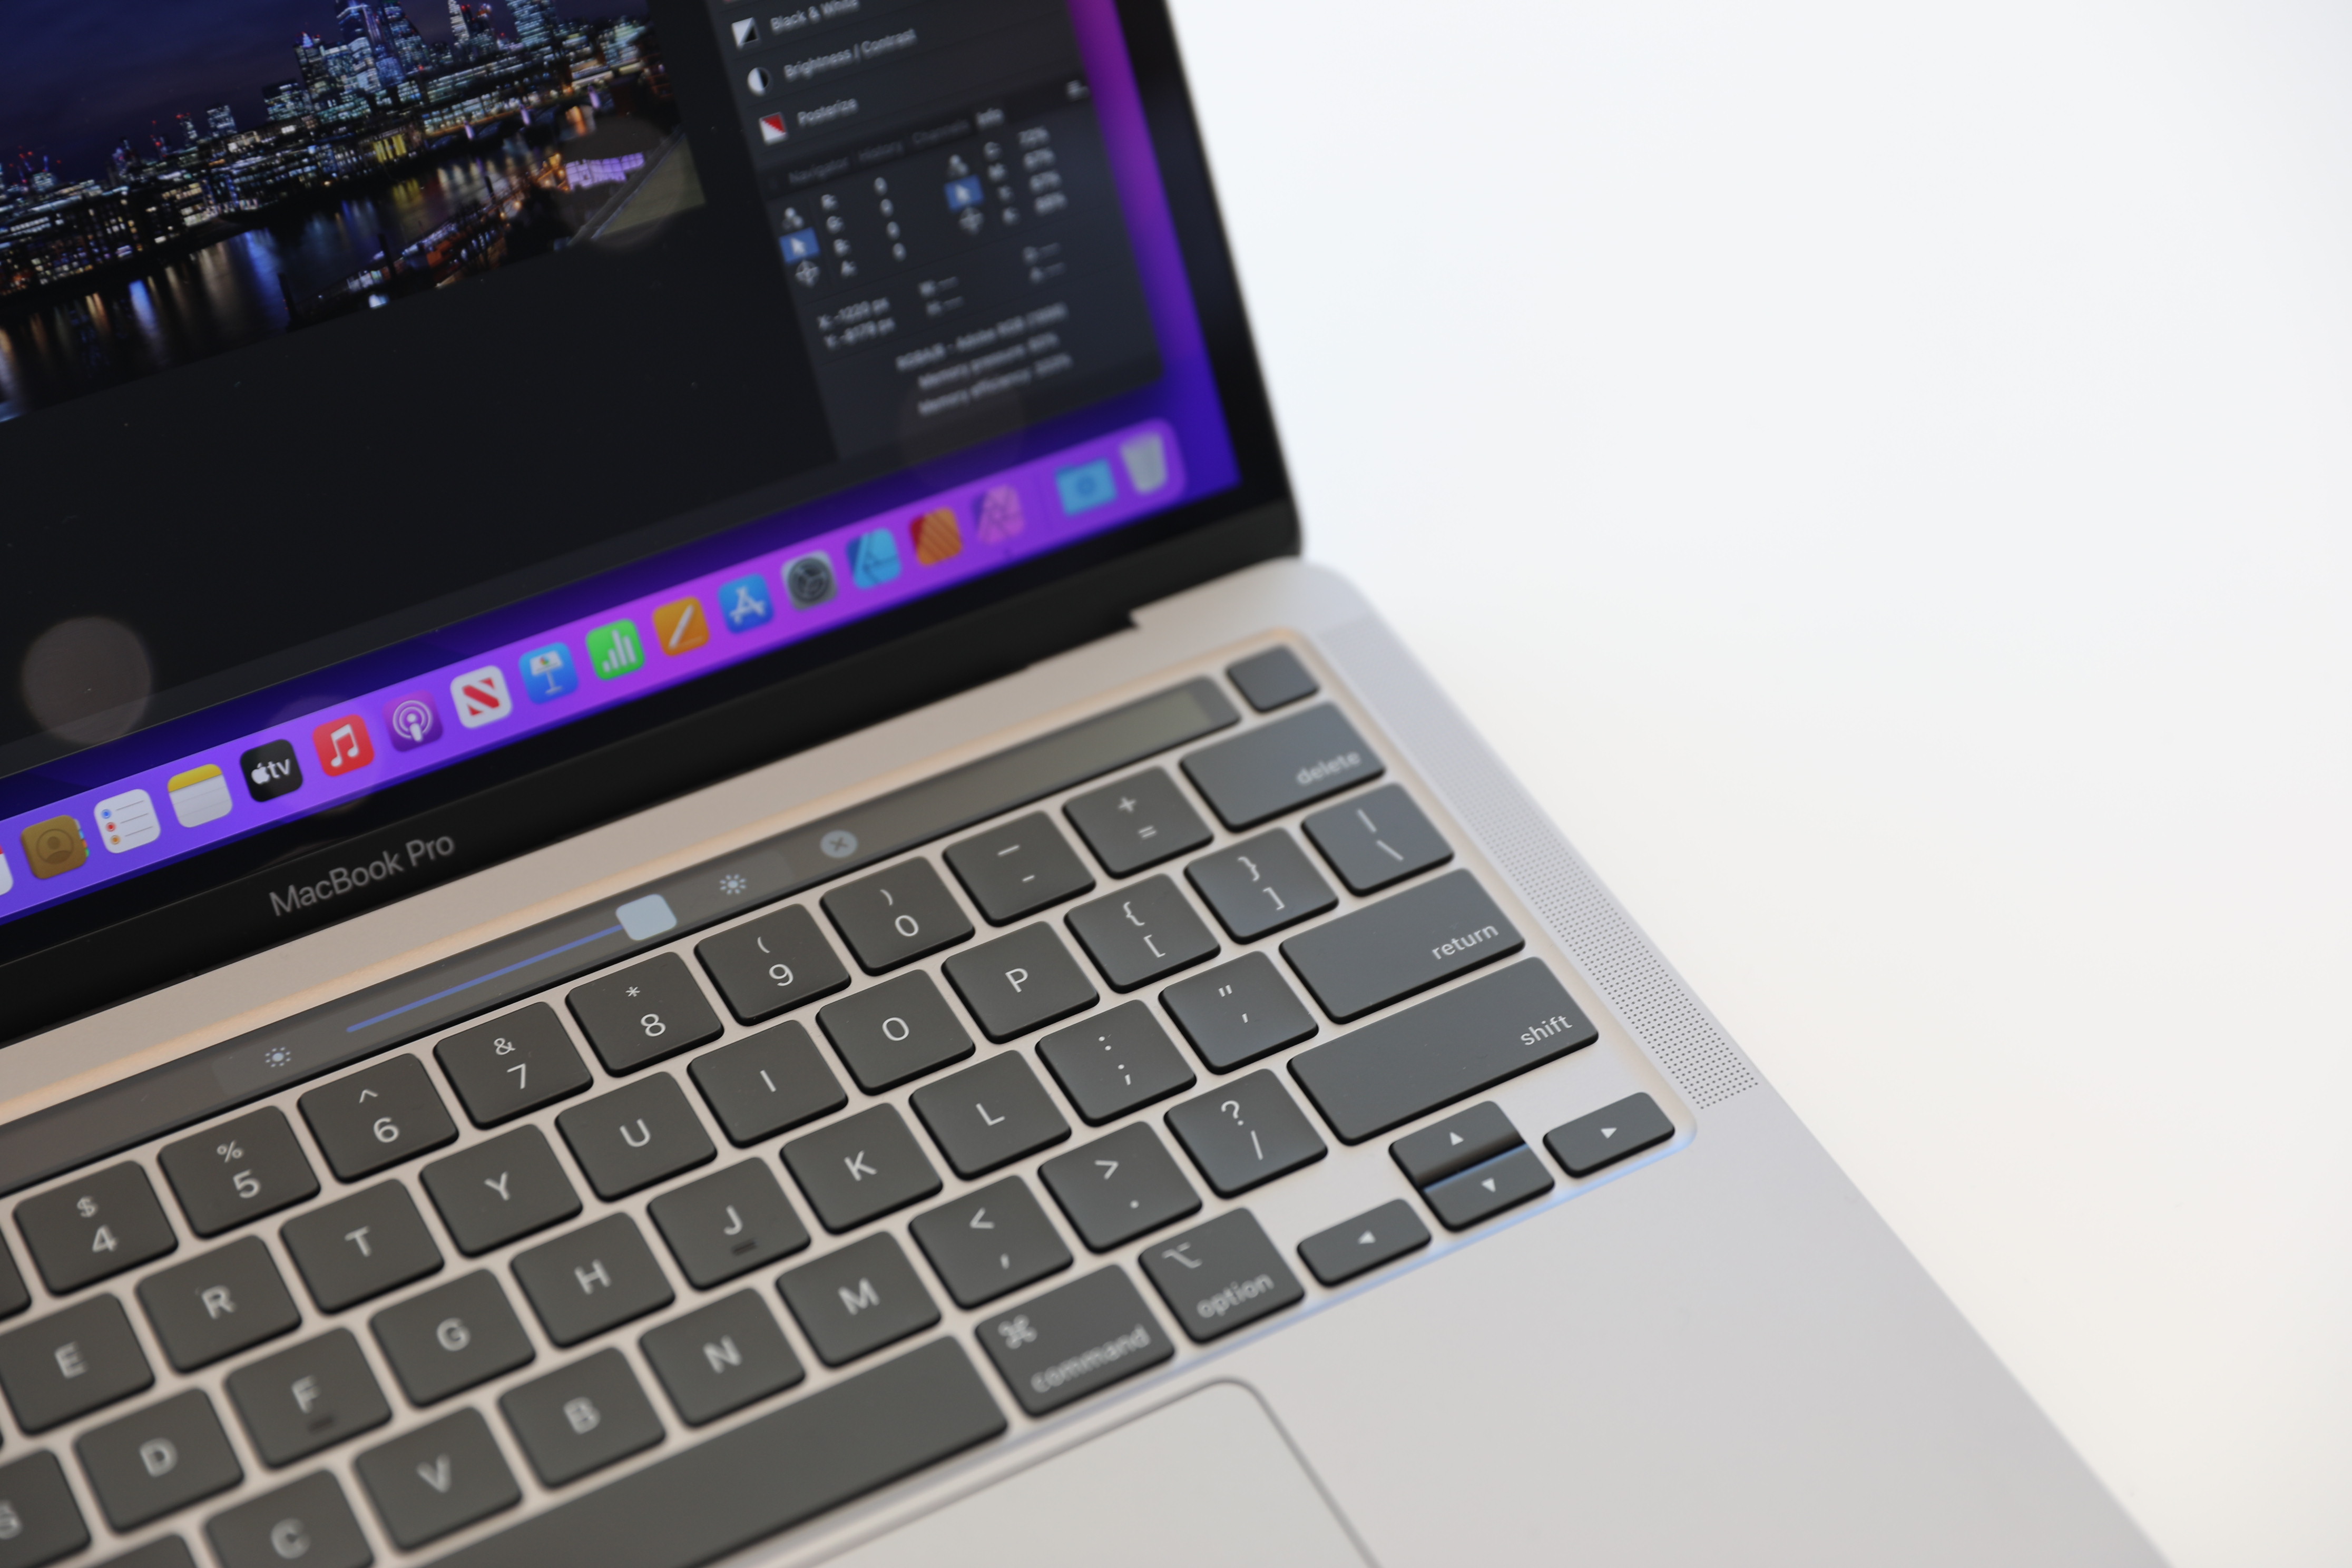 The M2 MacBook Pro is phenomenal - but man, I'm going to miss the Touch Bar